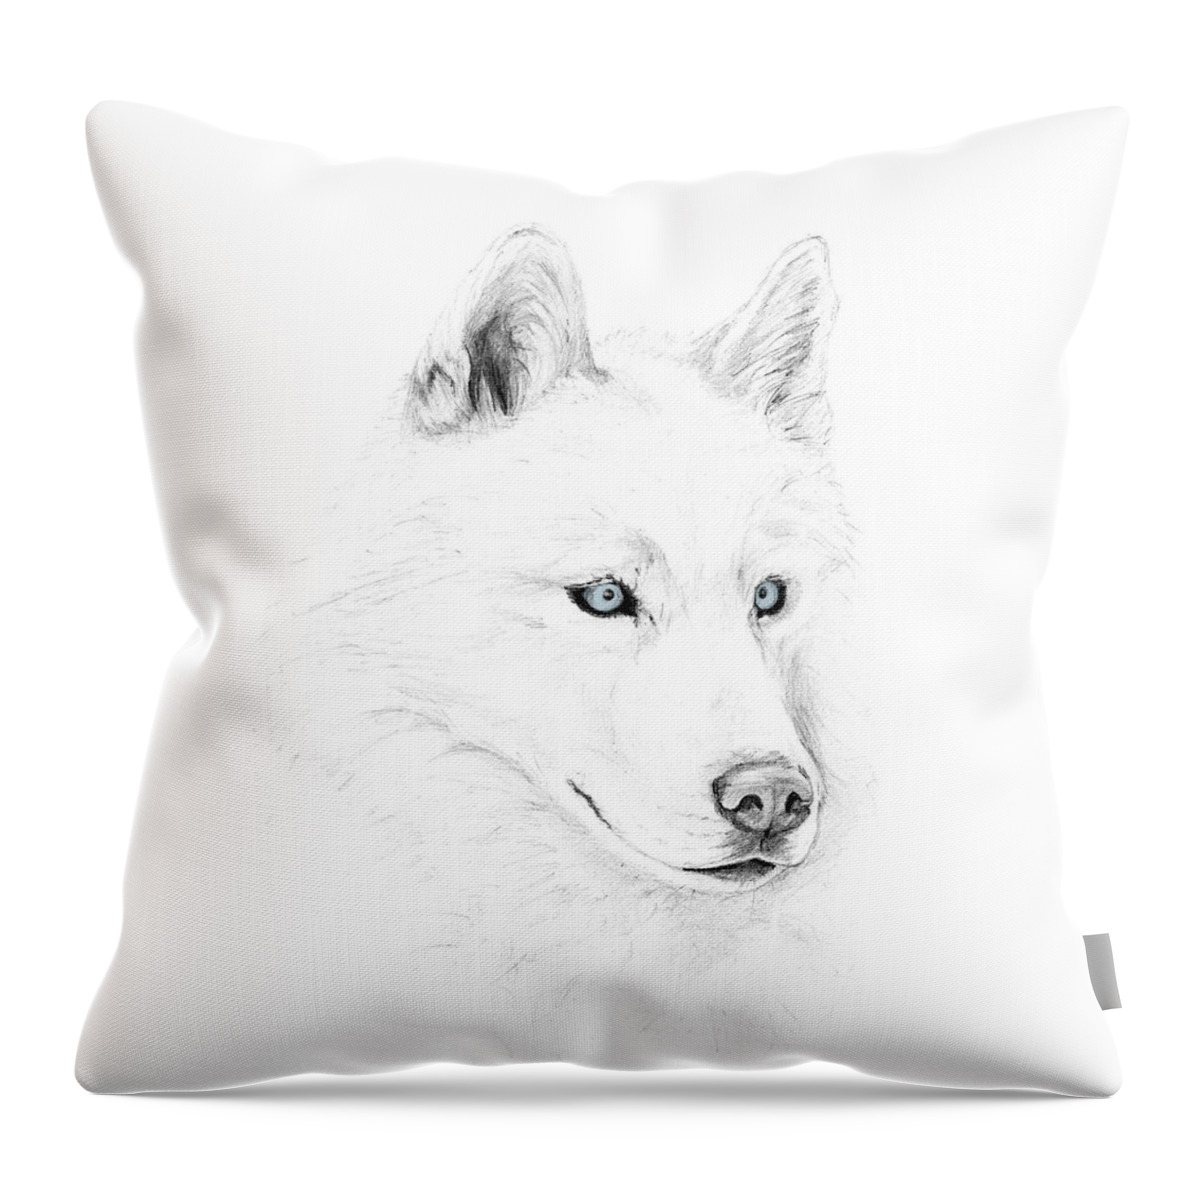 Puppy Throw Pillow featuring the digital art Saber A Siberian Husky by Creative Solutions RipdNTorn